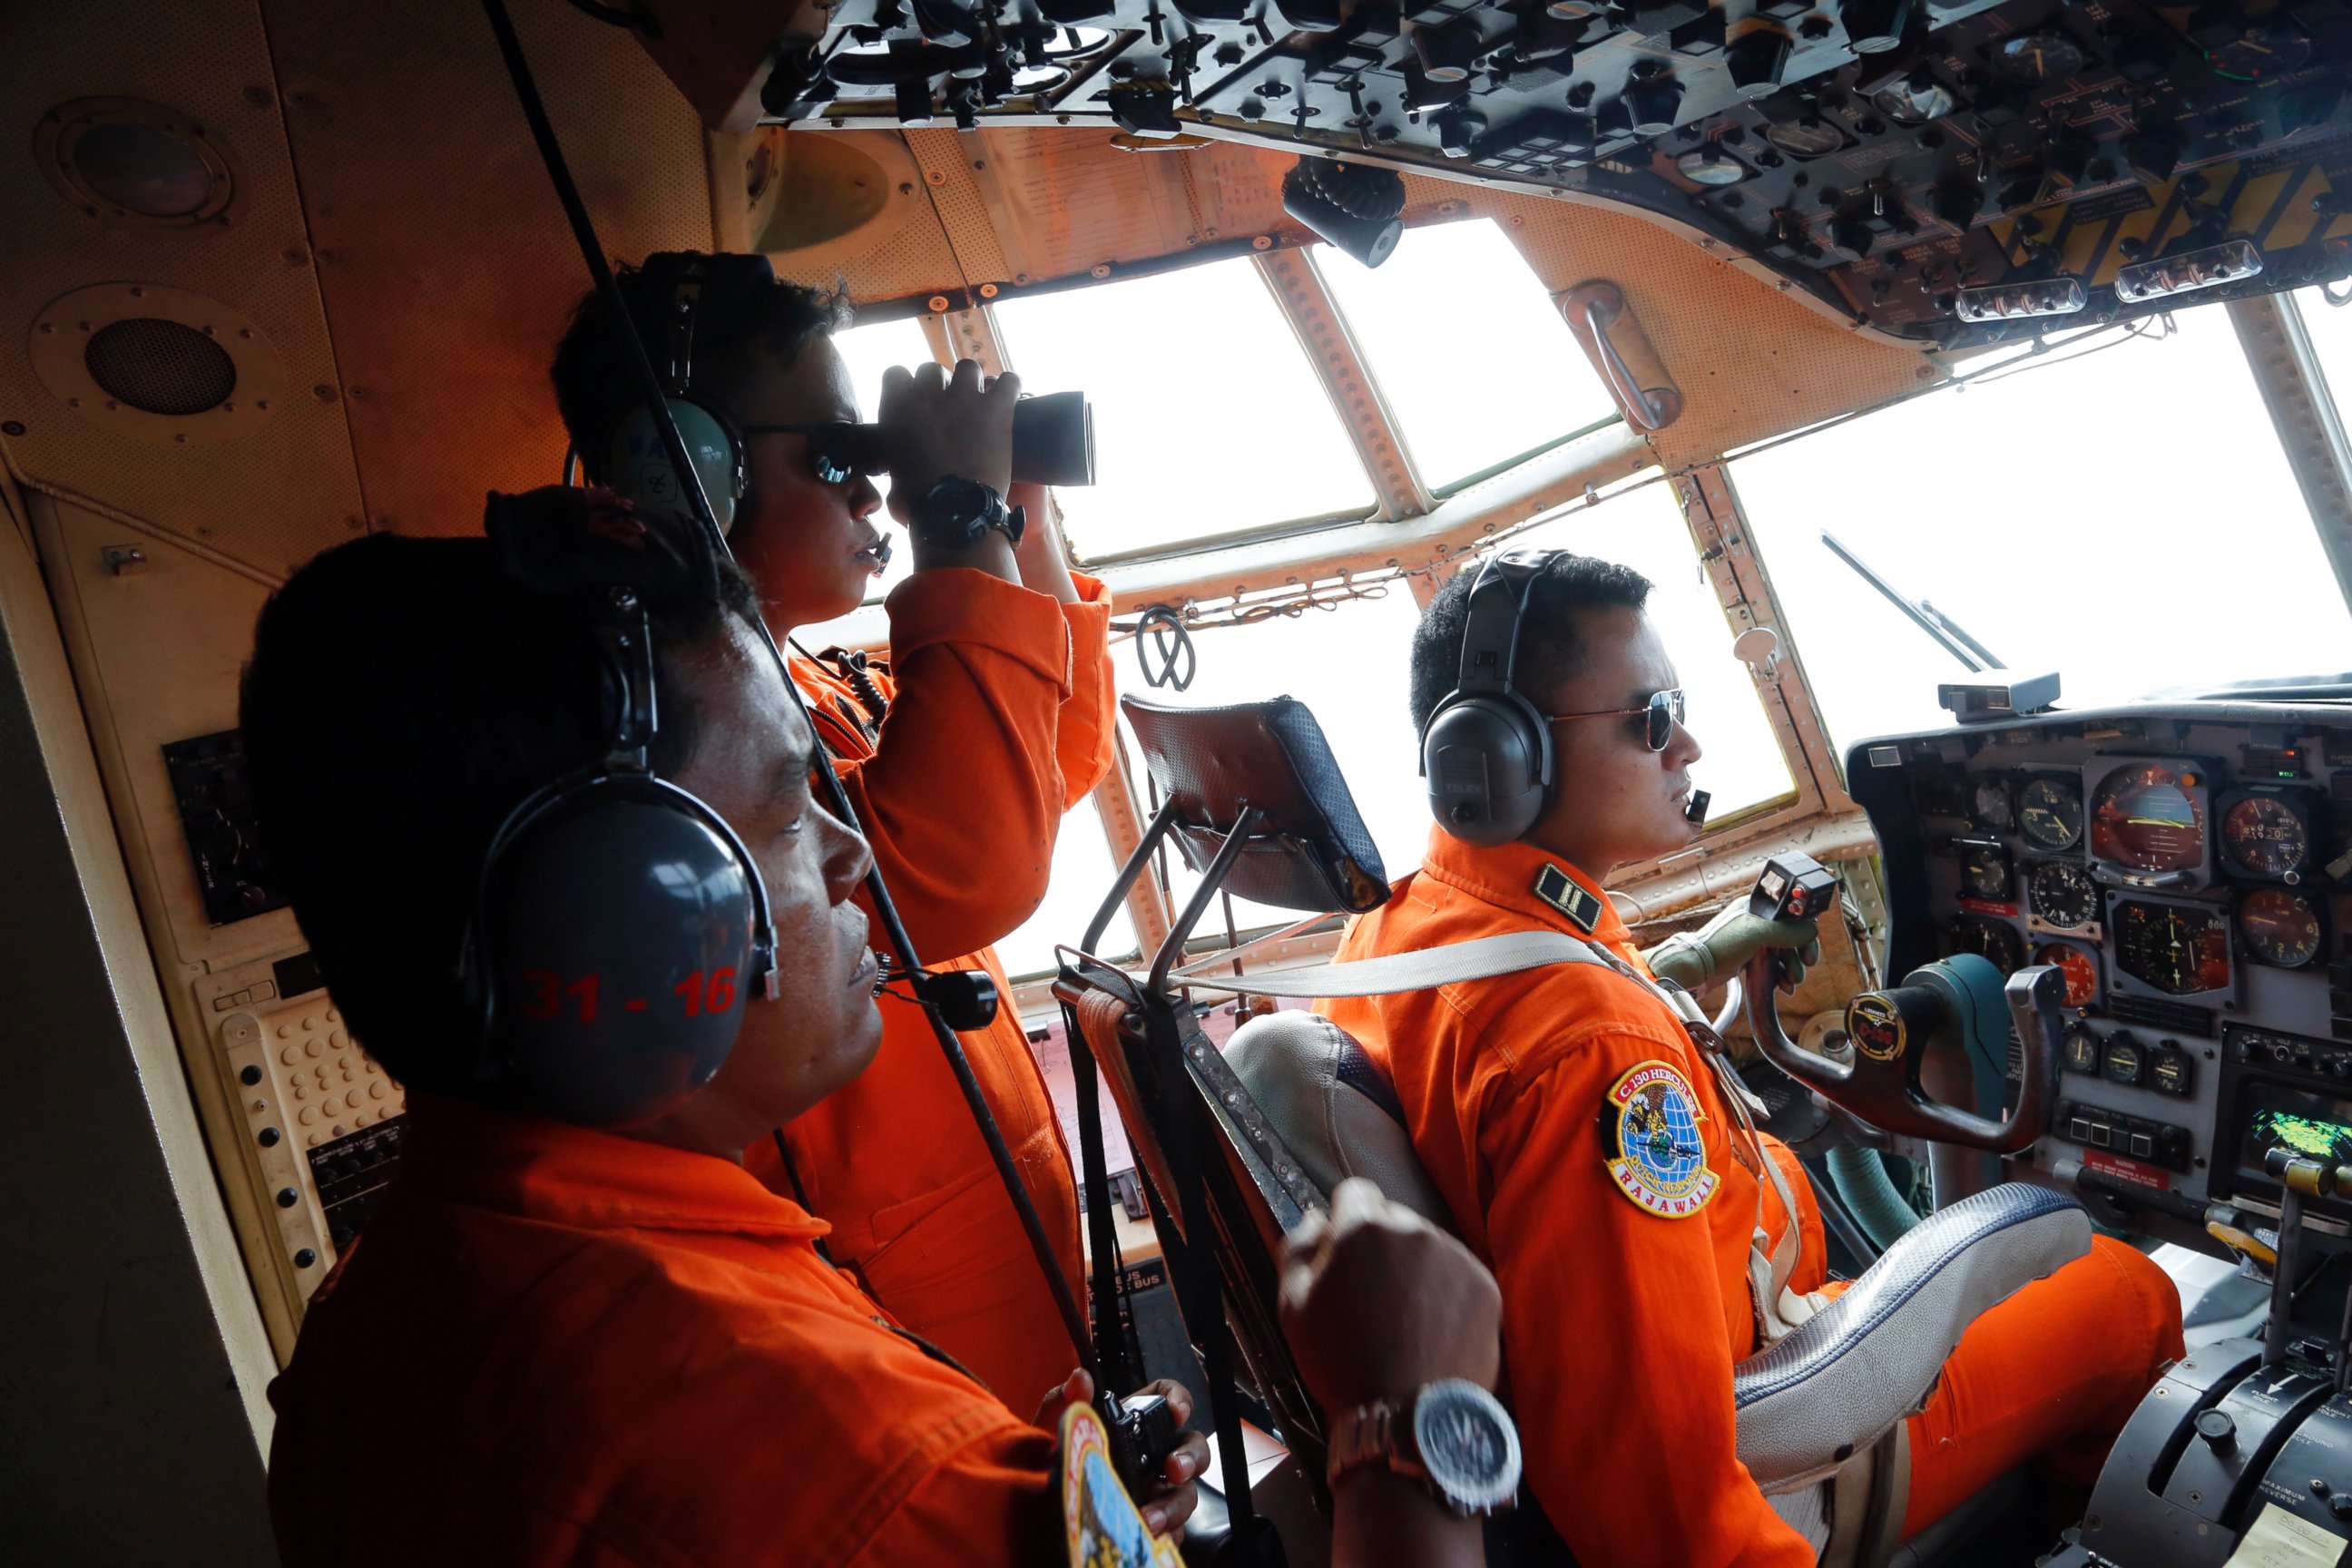 PHOTO: Crew of Indonesian Air Force C-130 airplane scan the horizon while searching for the missing AirAsia flight 8501 jetliner over the waters of Karimata Strait in Indonesia, Dec. 29, 2014.